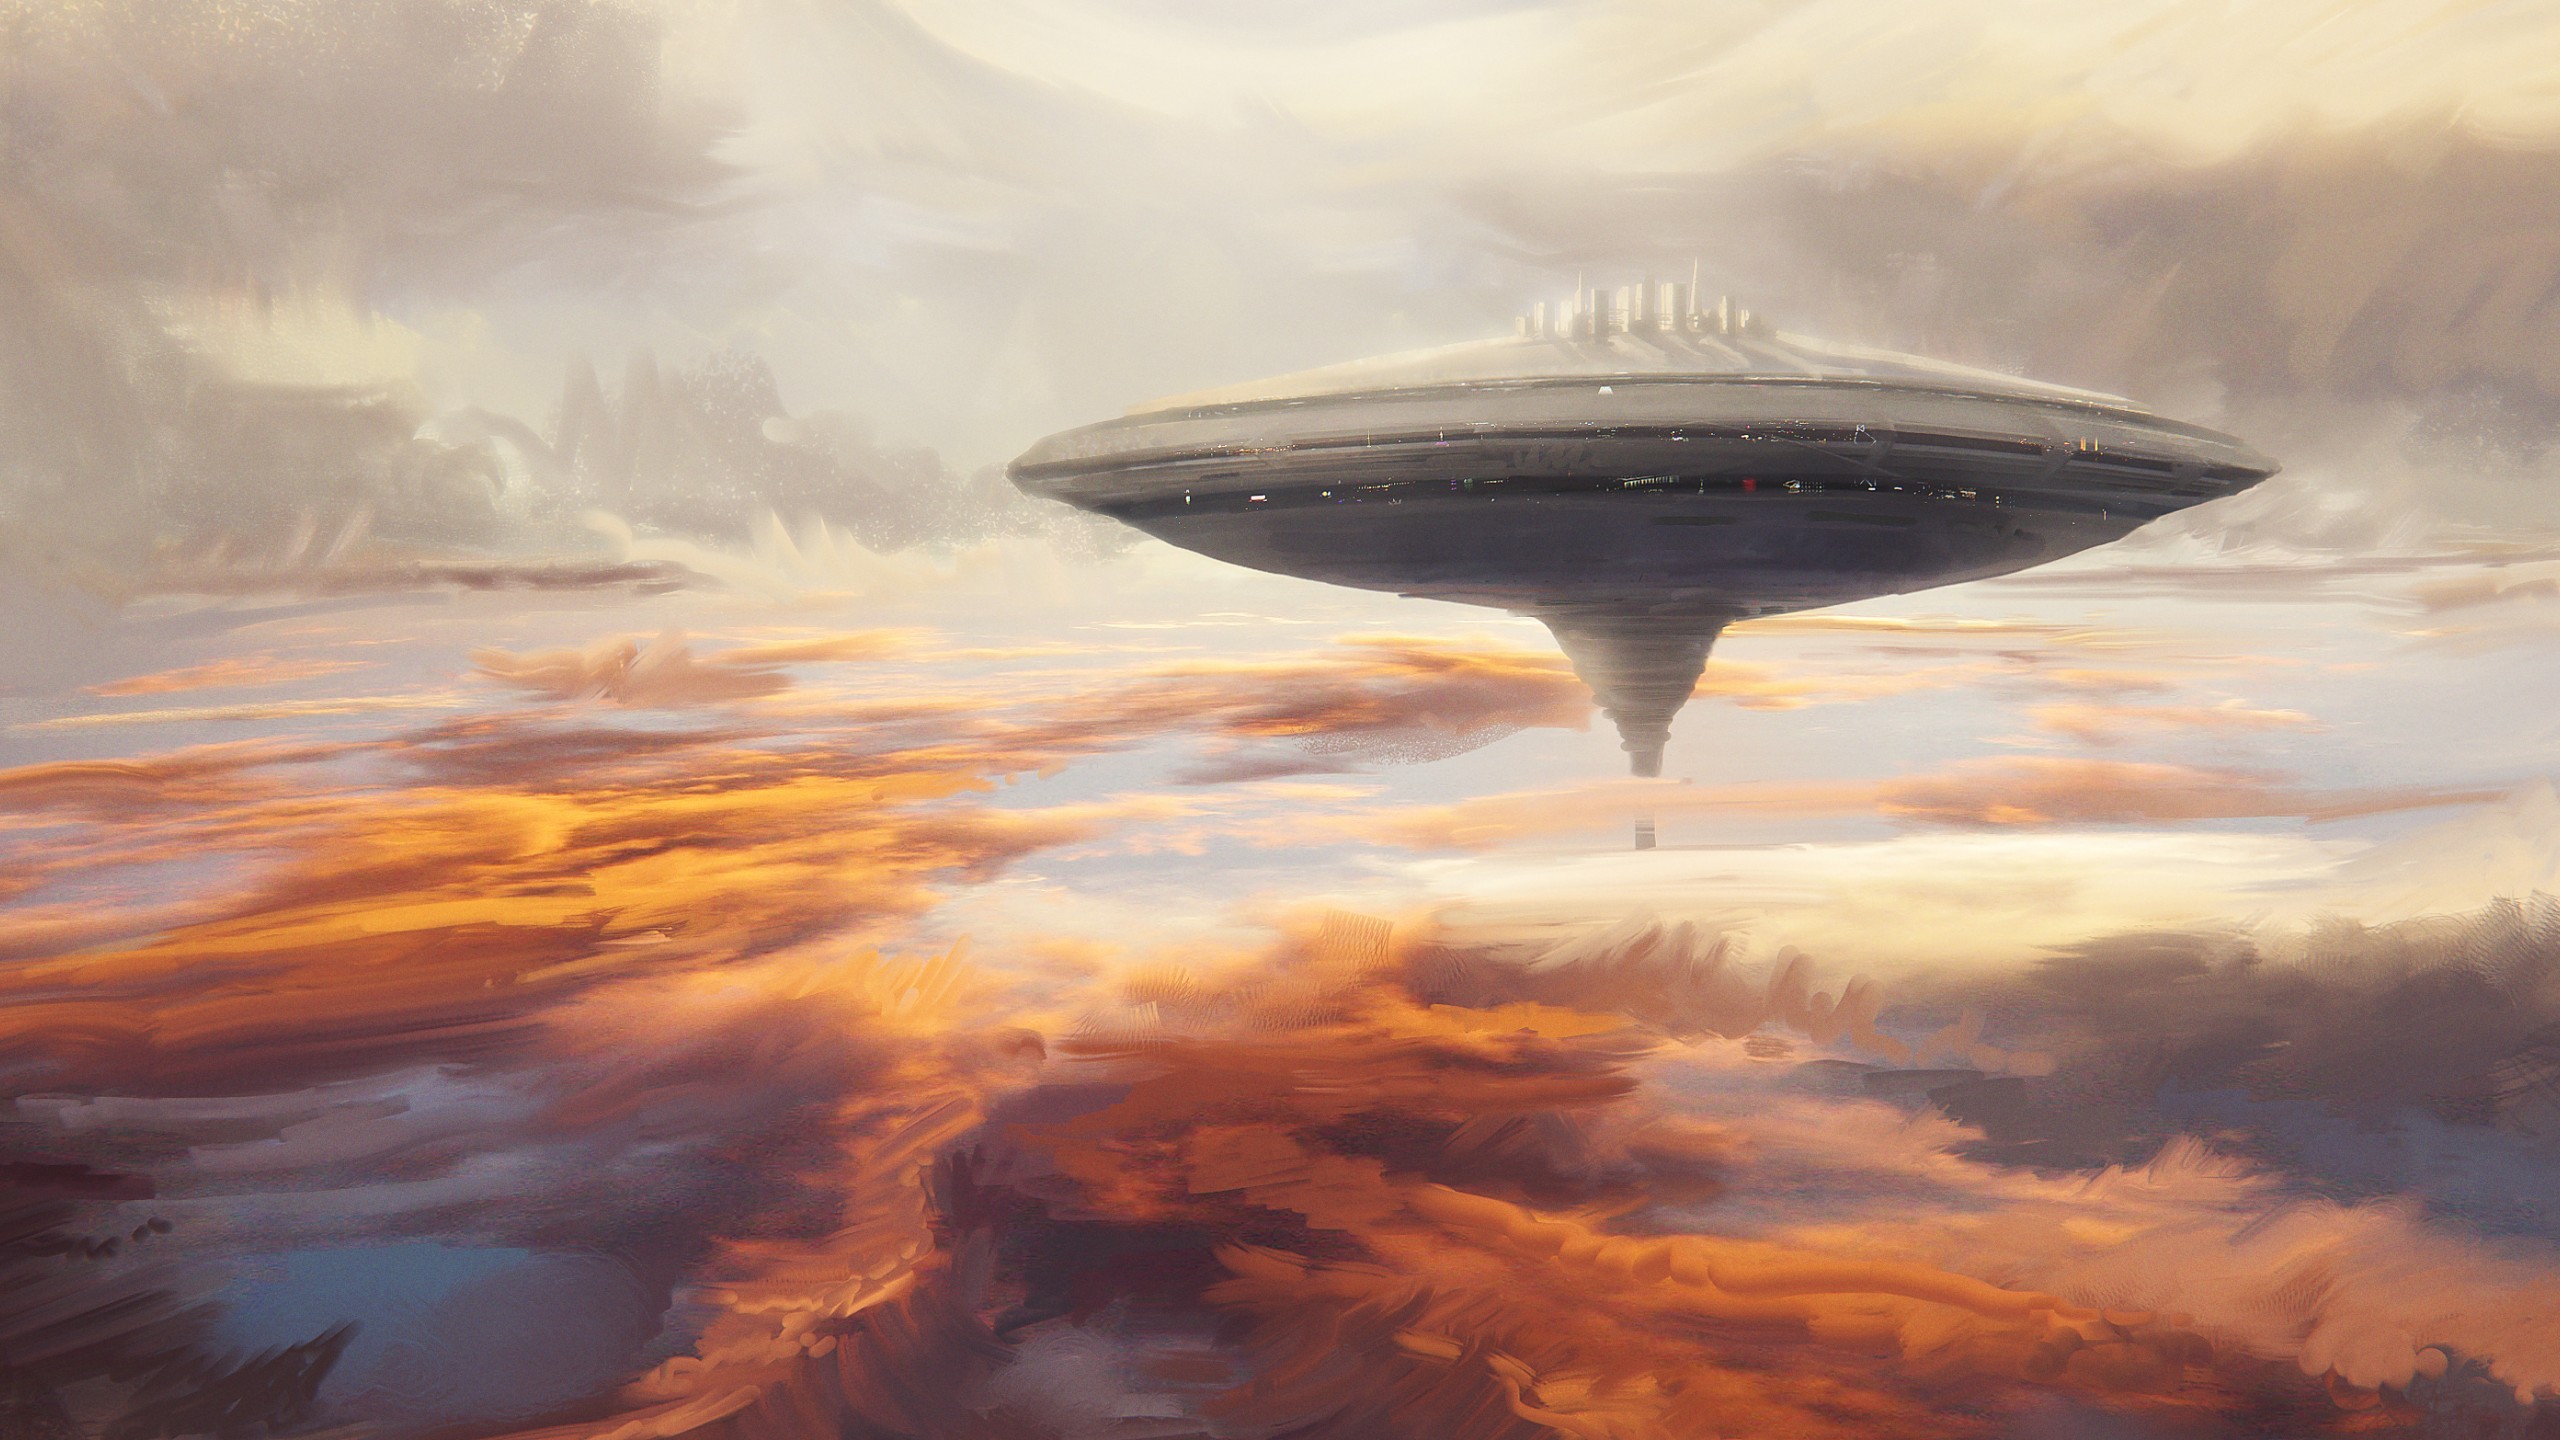 General 2560x1440 Star Wars cloud city science fiction Bespin artwork